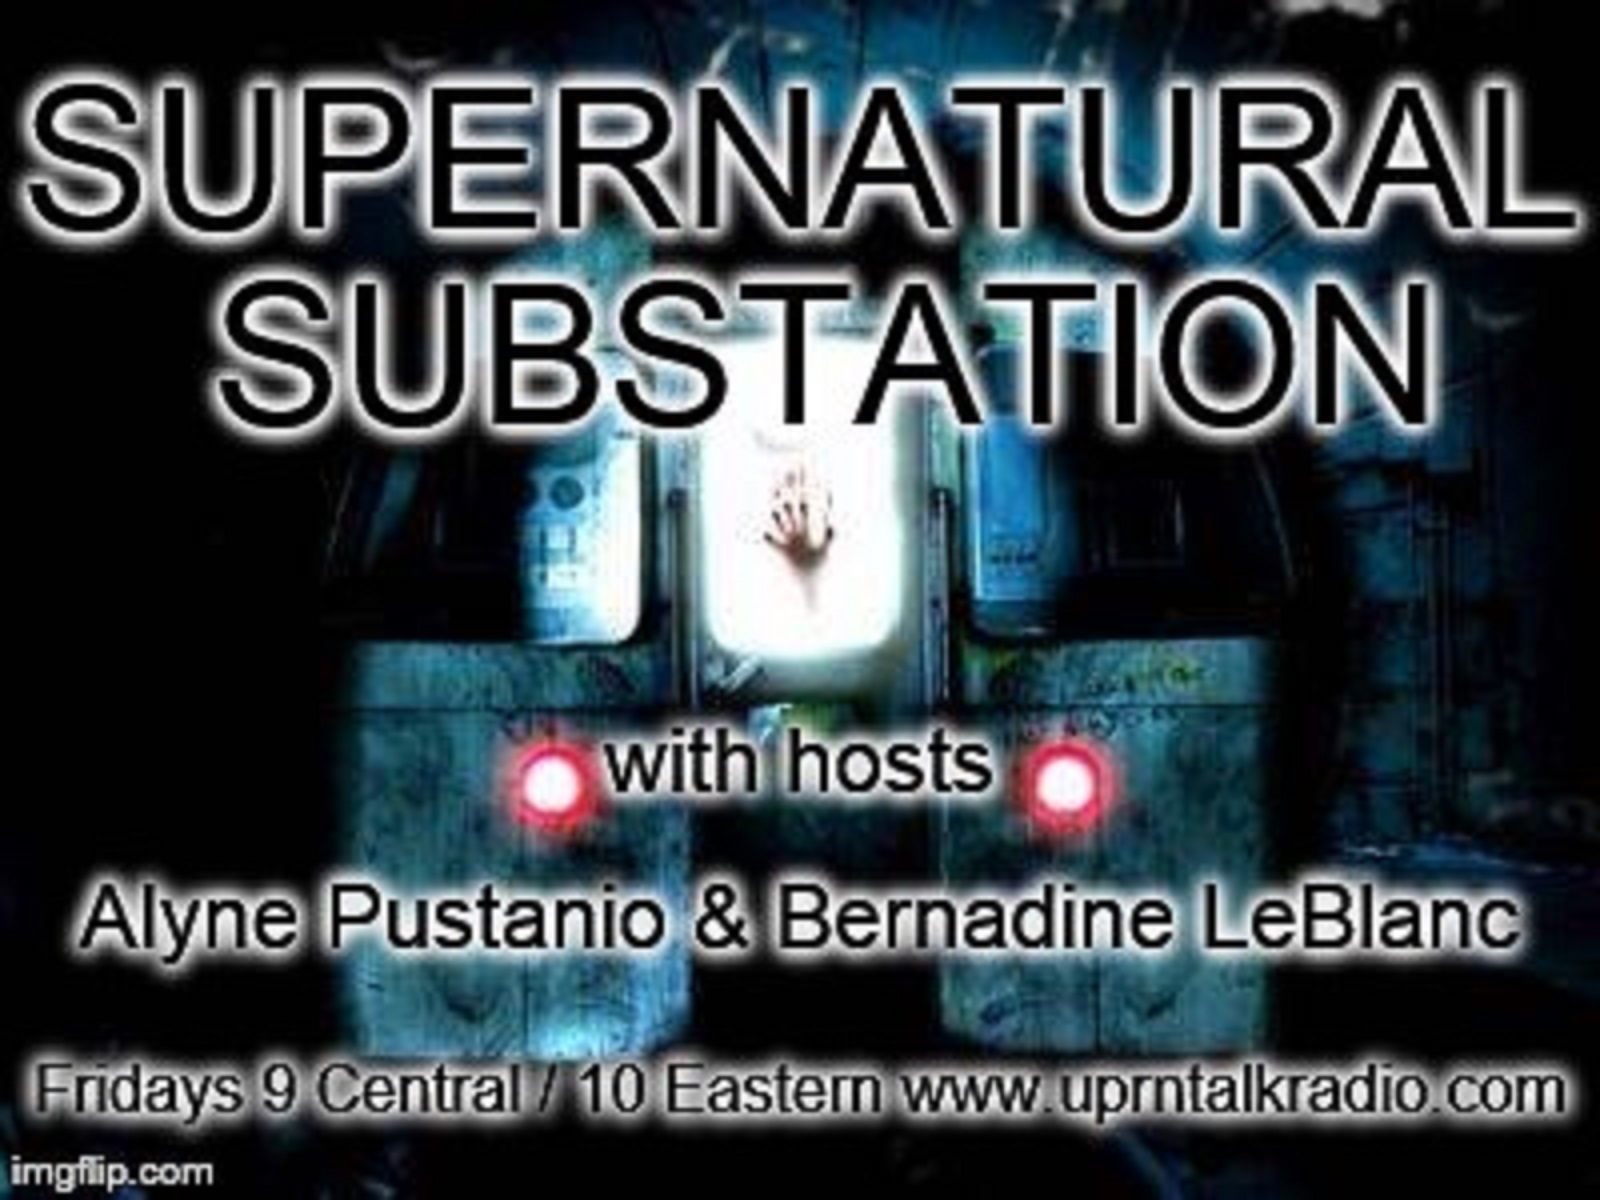 SUPERNATURAL SUBSTATION 2/23/2018 PAULA WESTBROOK PARANORMAL DIS-UNITY GET SCREWED OVER IN THE PARANORMAL FIELD